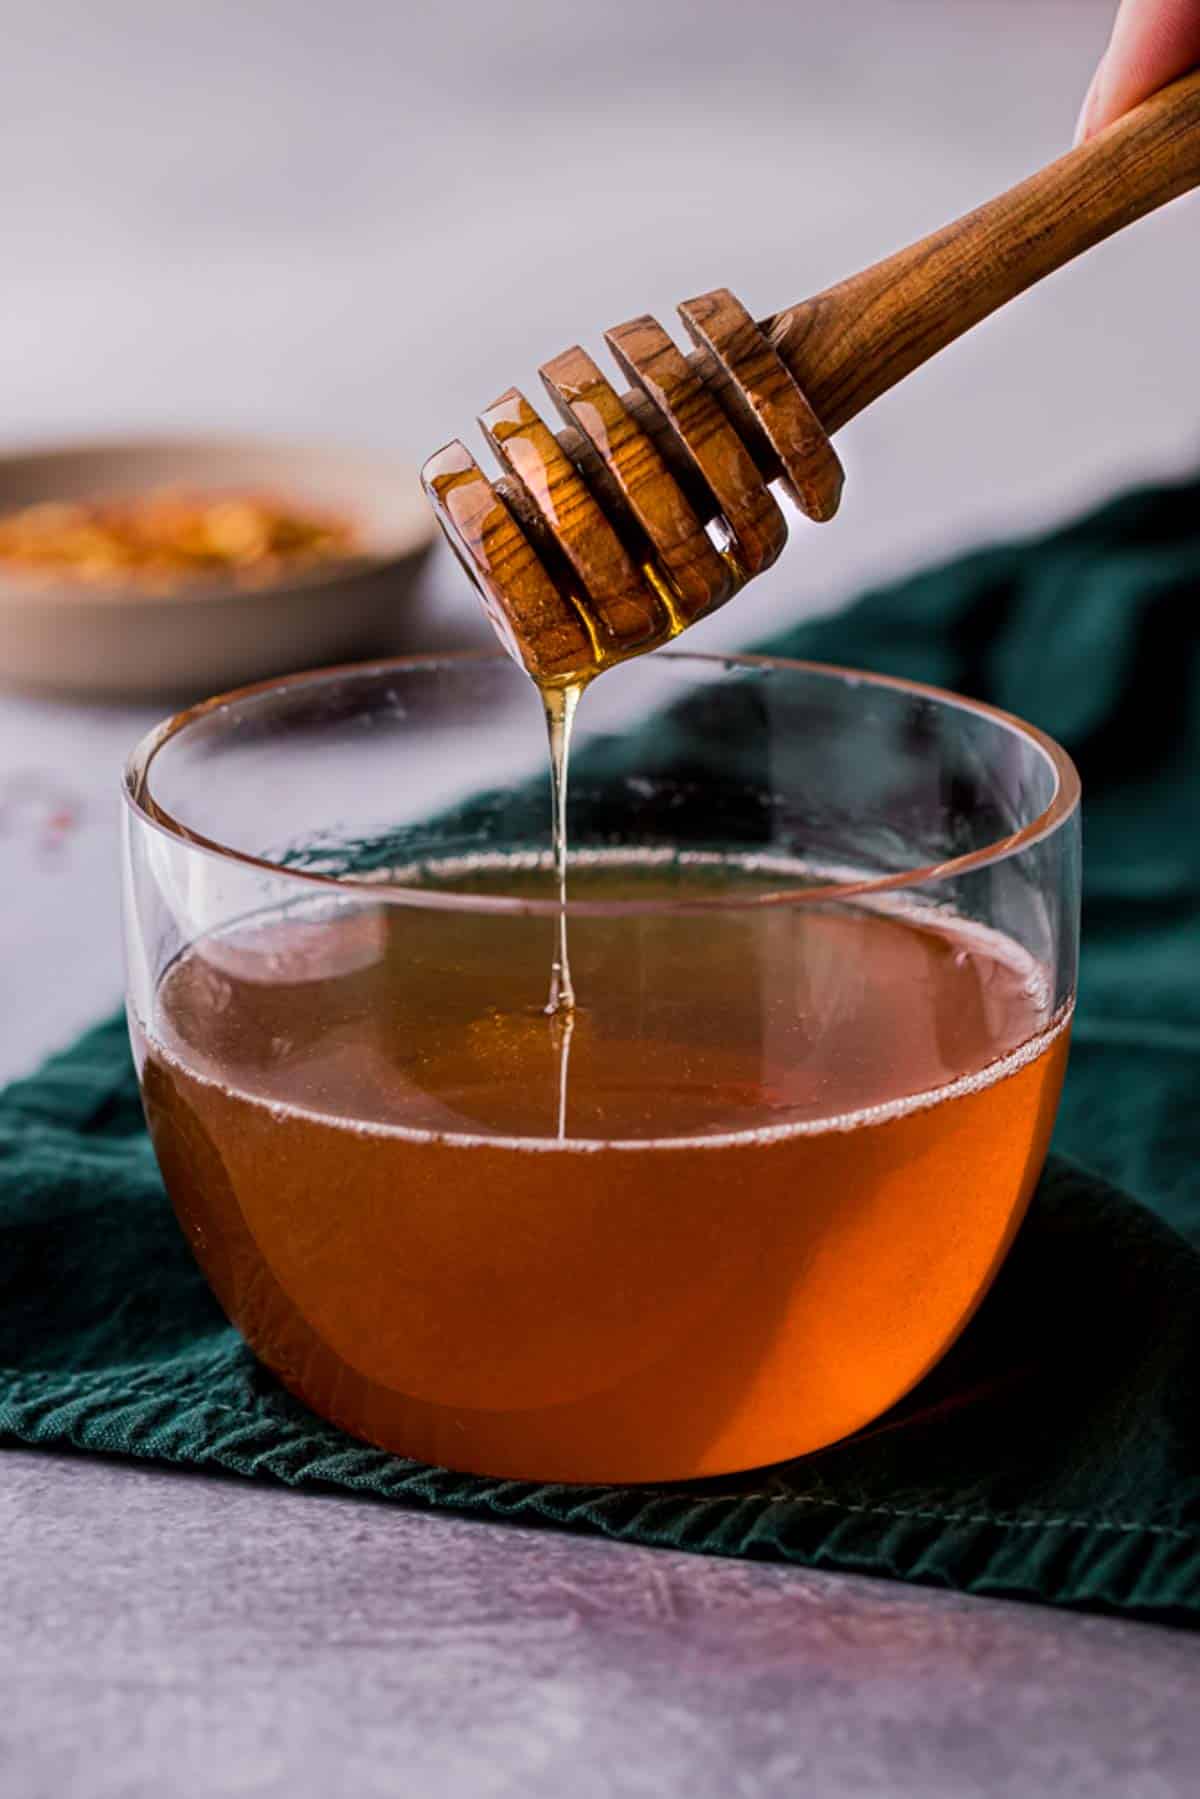 honey being drizzled into a bowl